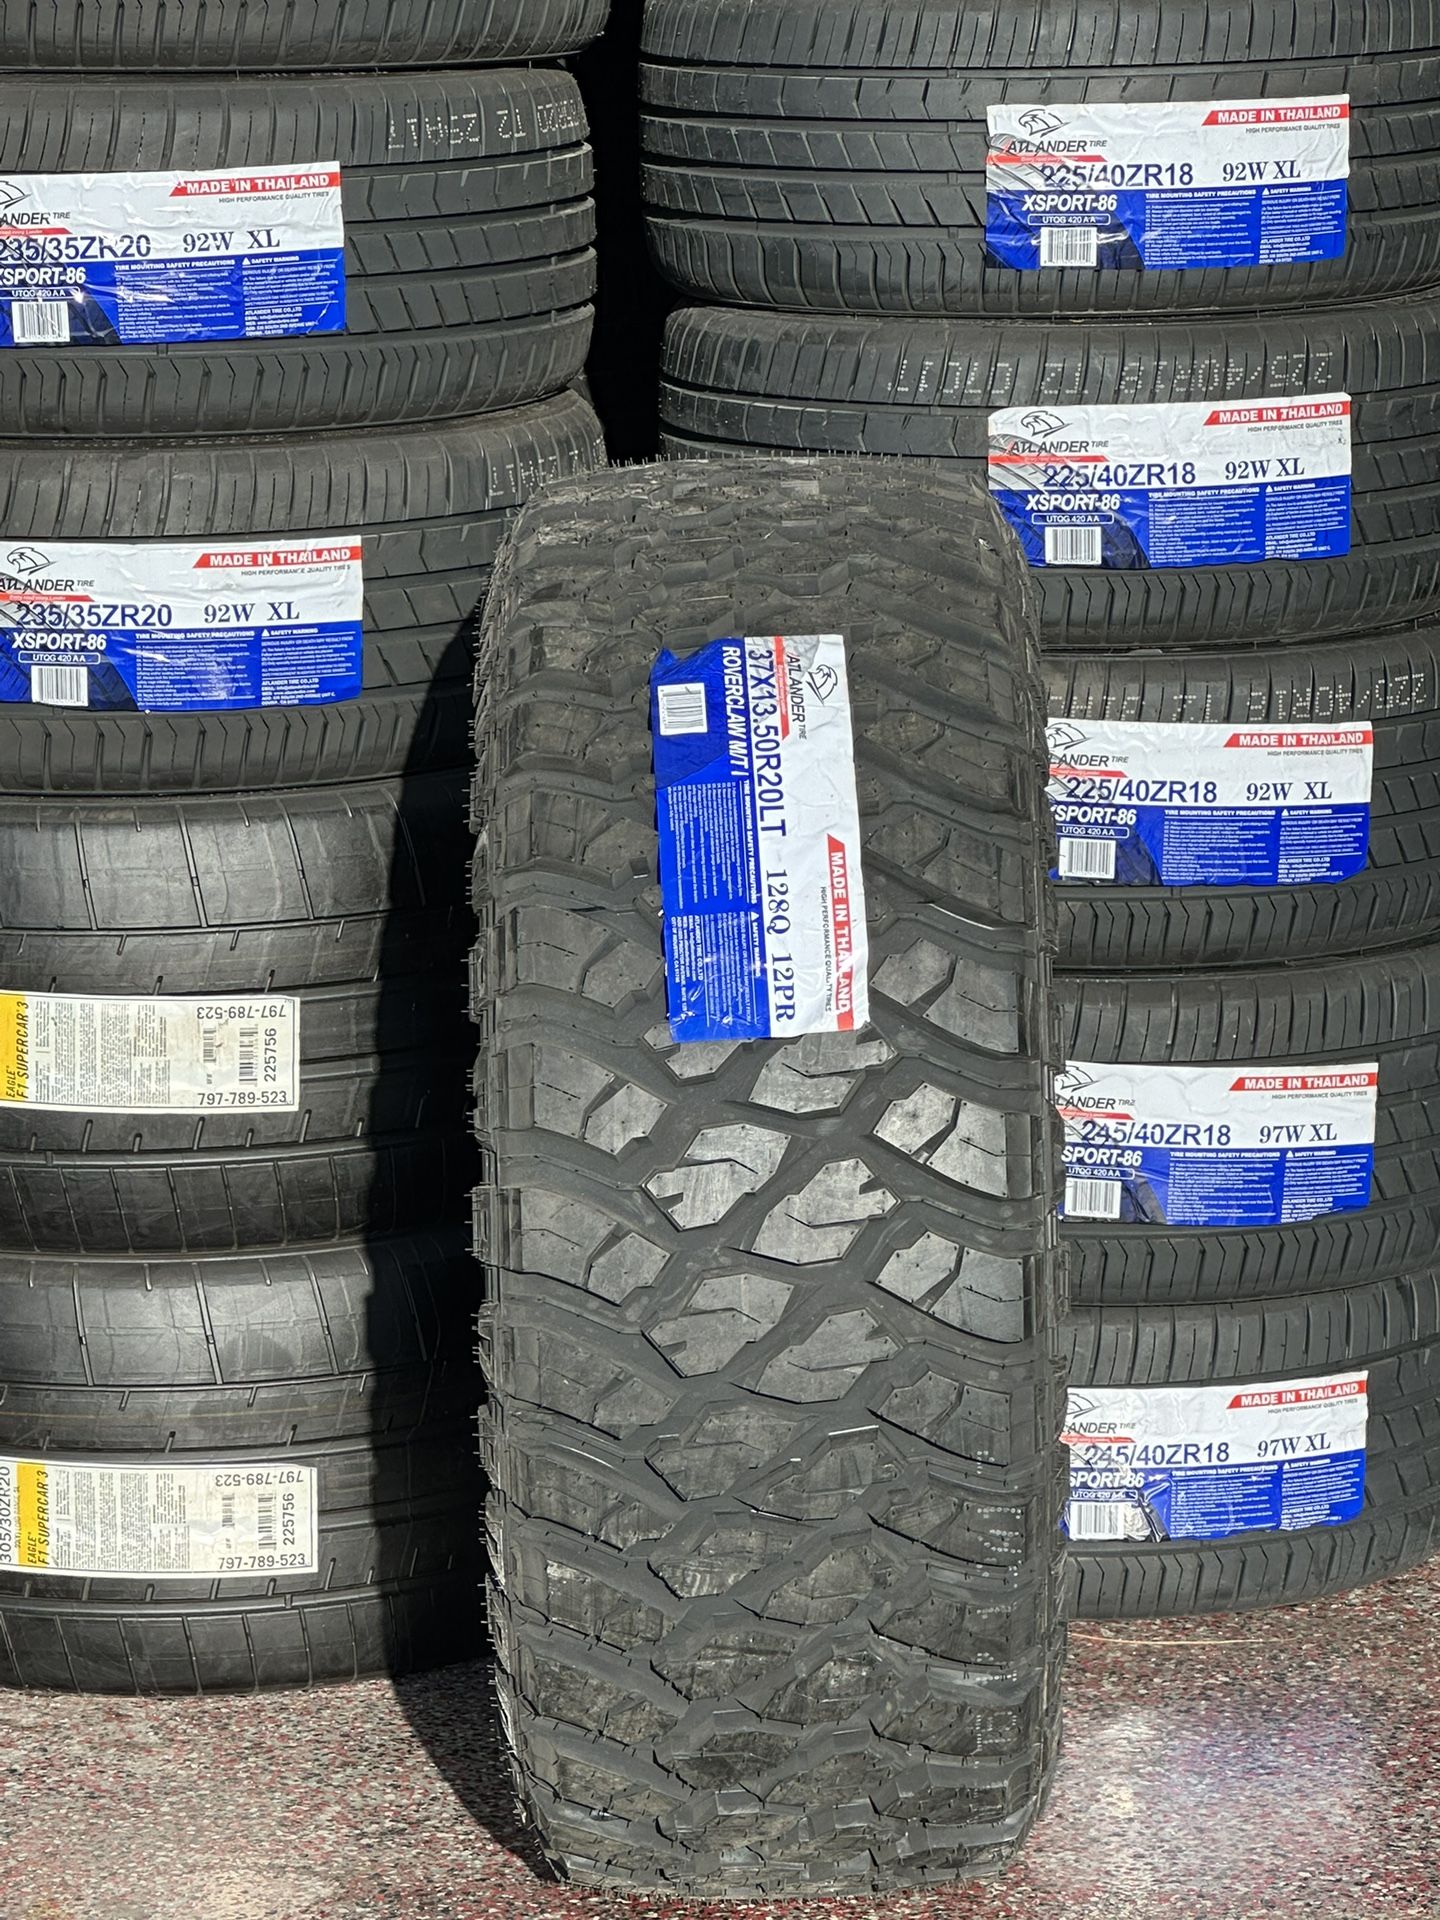 ATLANDER 37/13.50/20 $275 EACH NEW MT 37/13.50R20 LT 12 PLY HEAVY DUTTY FOR TOWING AND HEAVY LOADS AND DUALLYS  37/13.50R/20 M/T